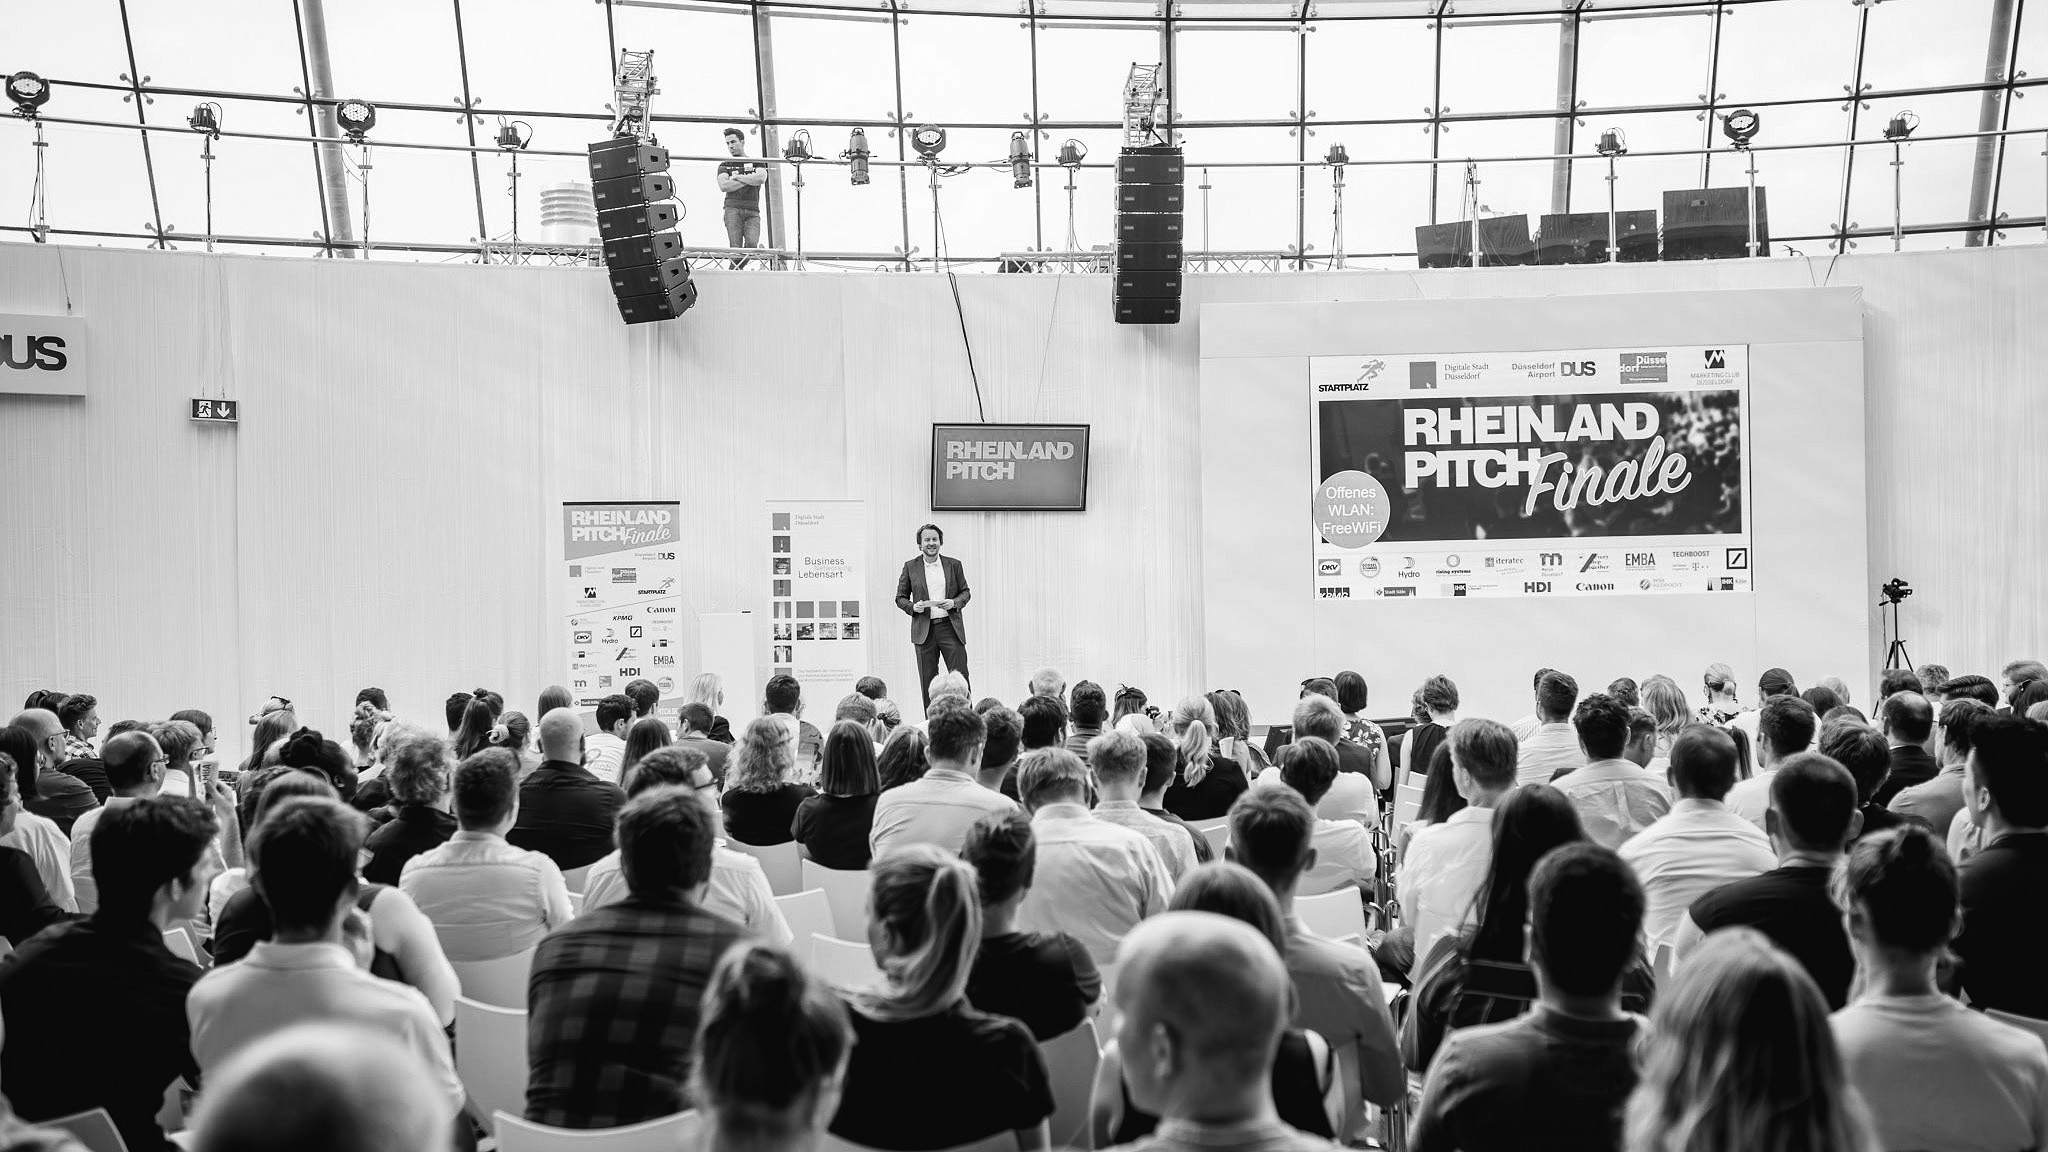 Another image of a Rheinland Pitch finals